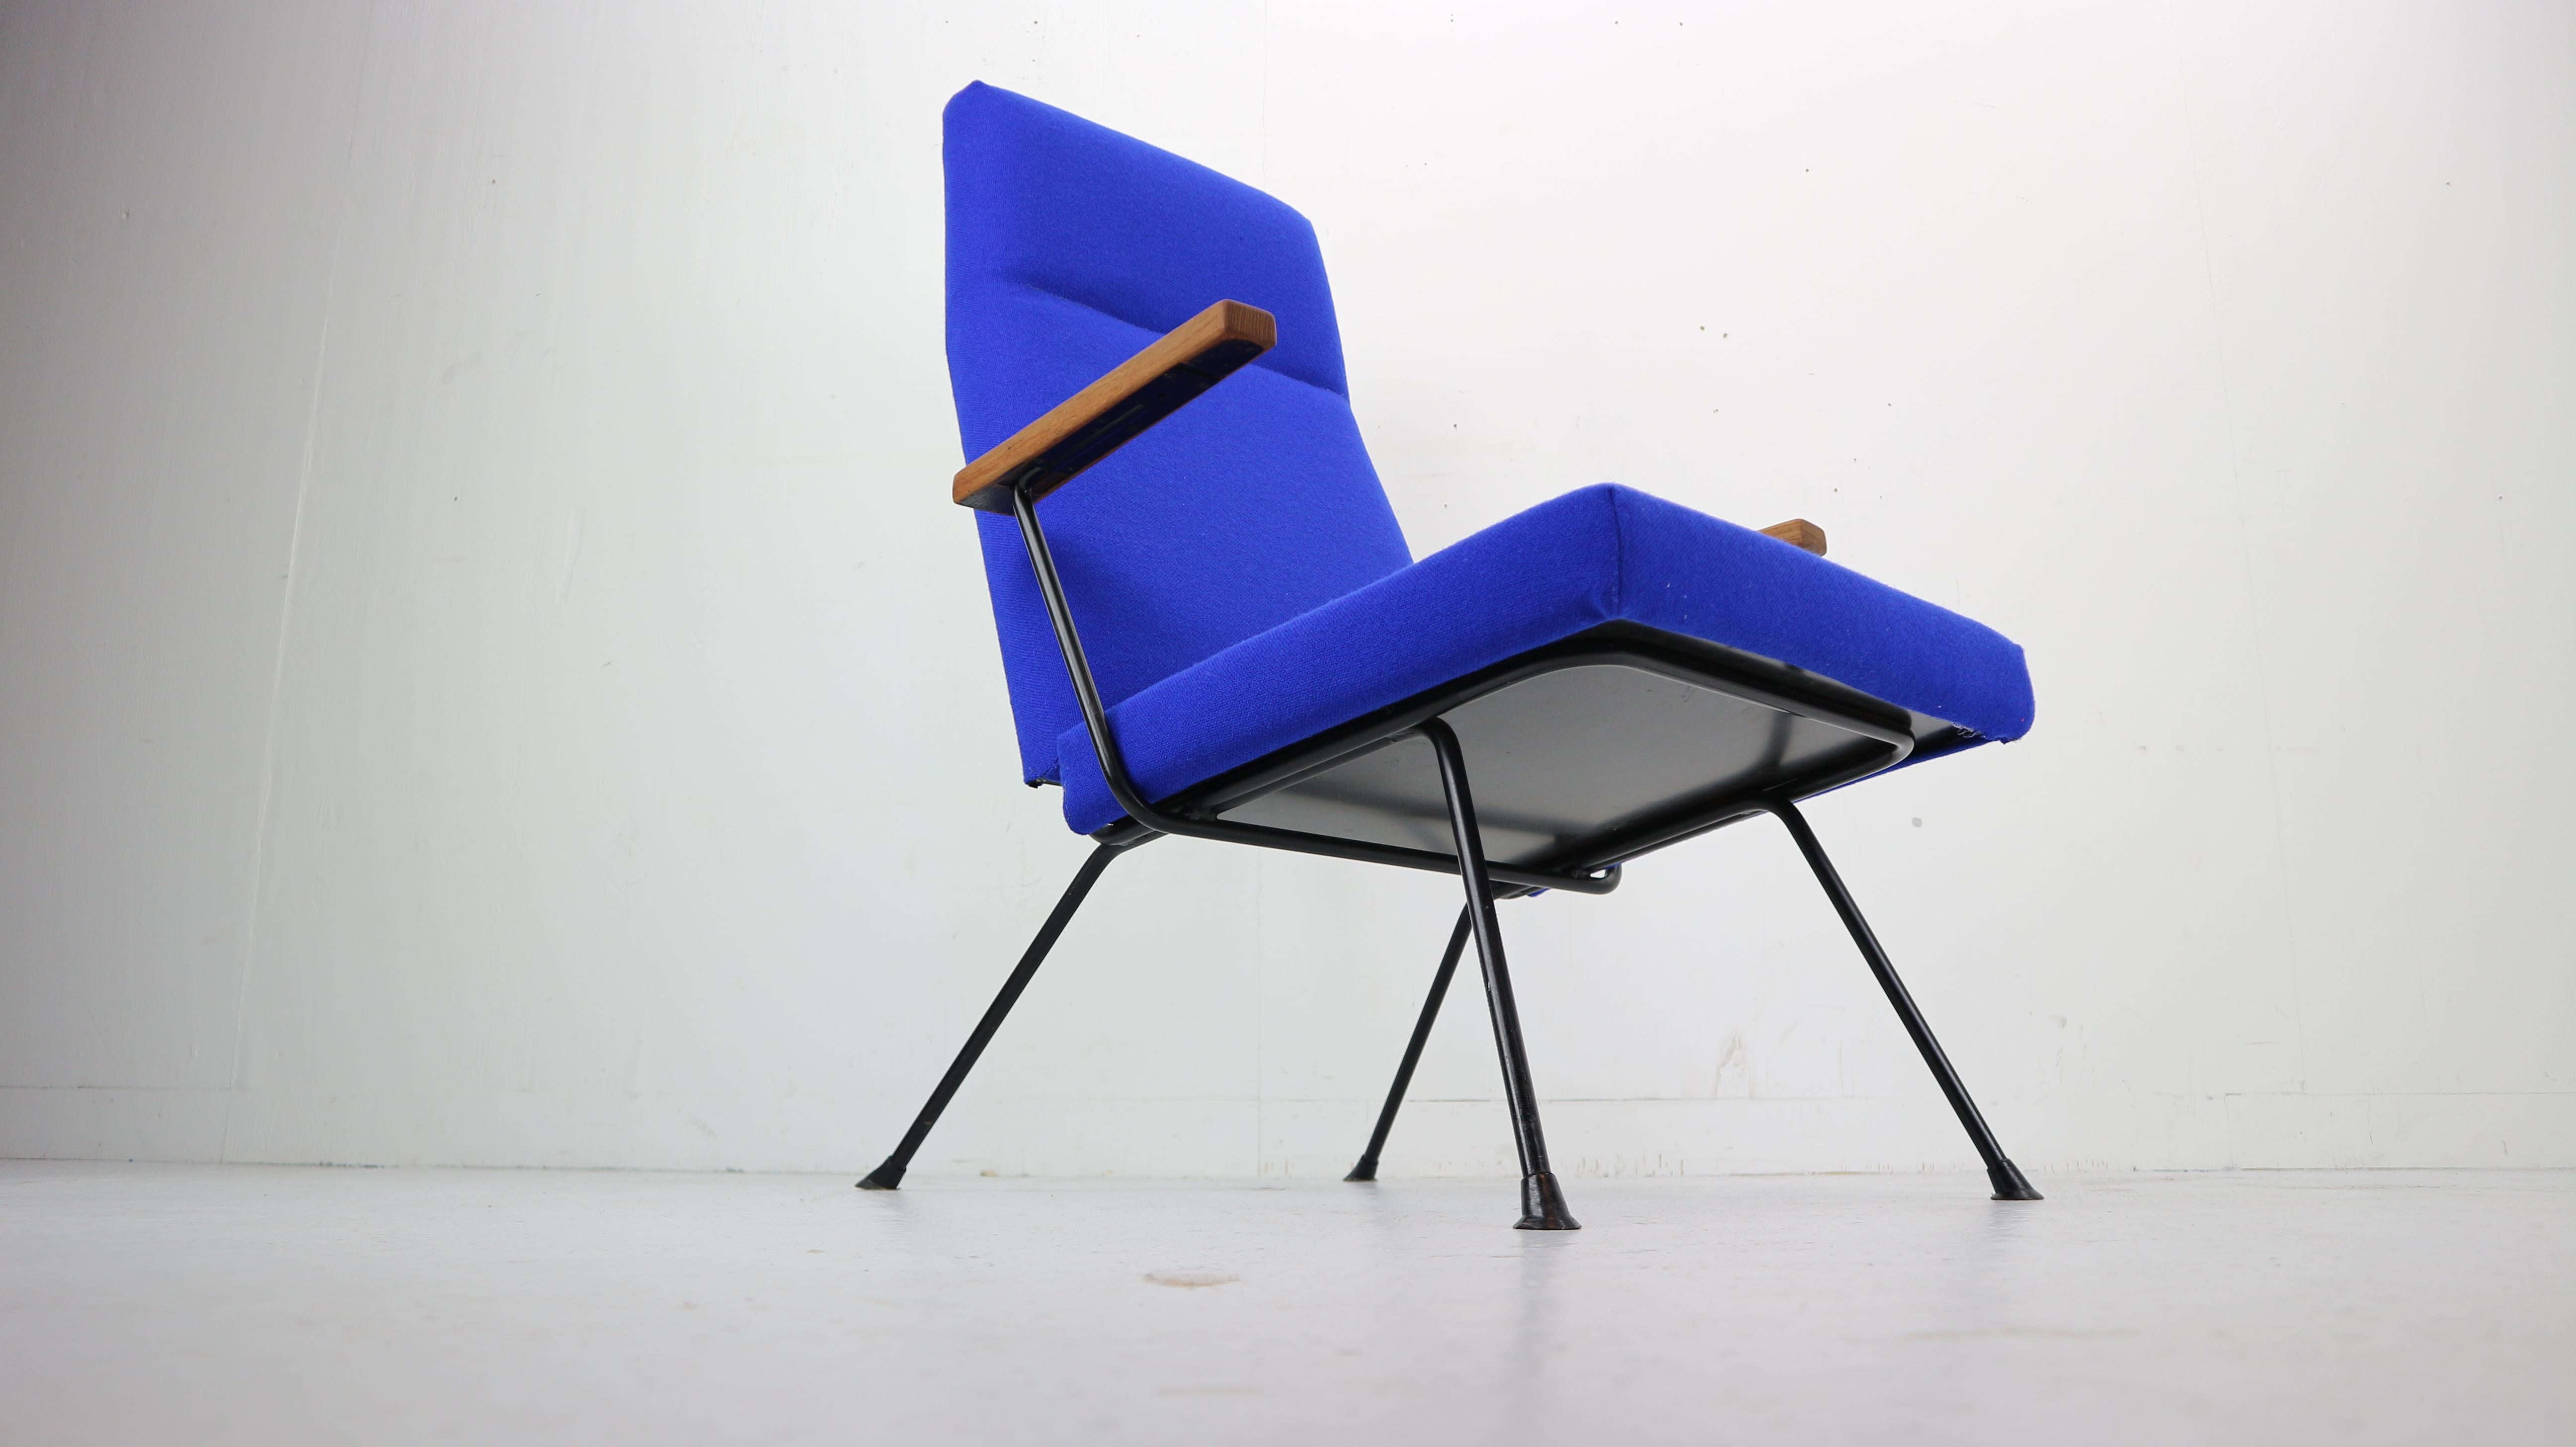 A.R. Cordemeyer 1410 easy chair designed for Gispen in 1959. This chair has been re-upholstered in a cobalt blue Kvadrat, wool fabric. The black metal frame and solid teak armrests are all in very good condition. The chairs are sold as a set.